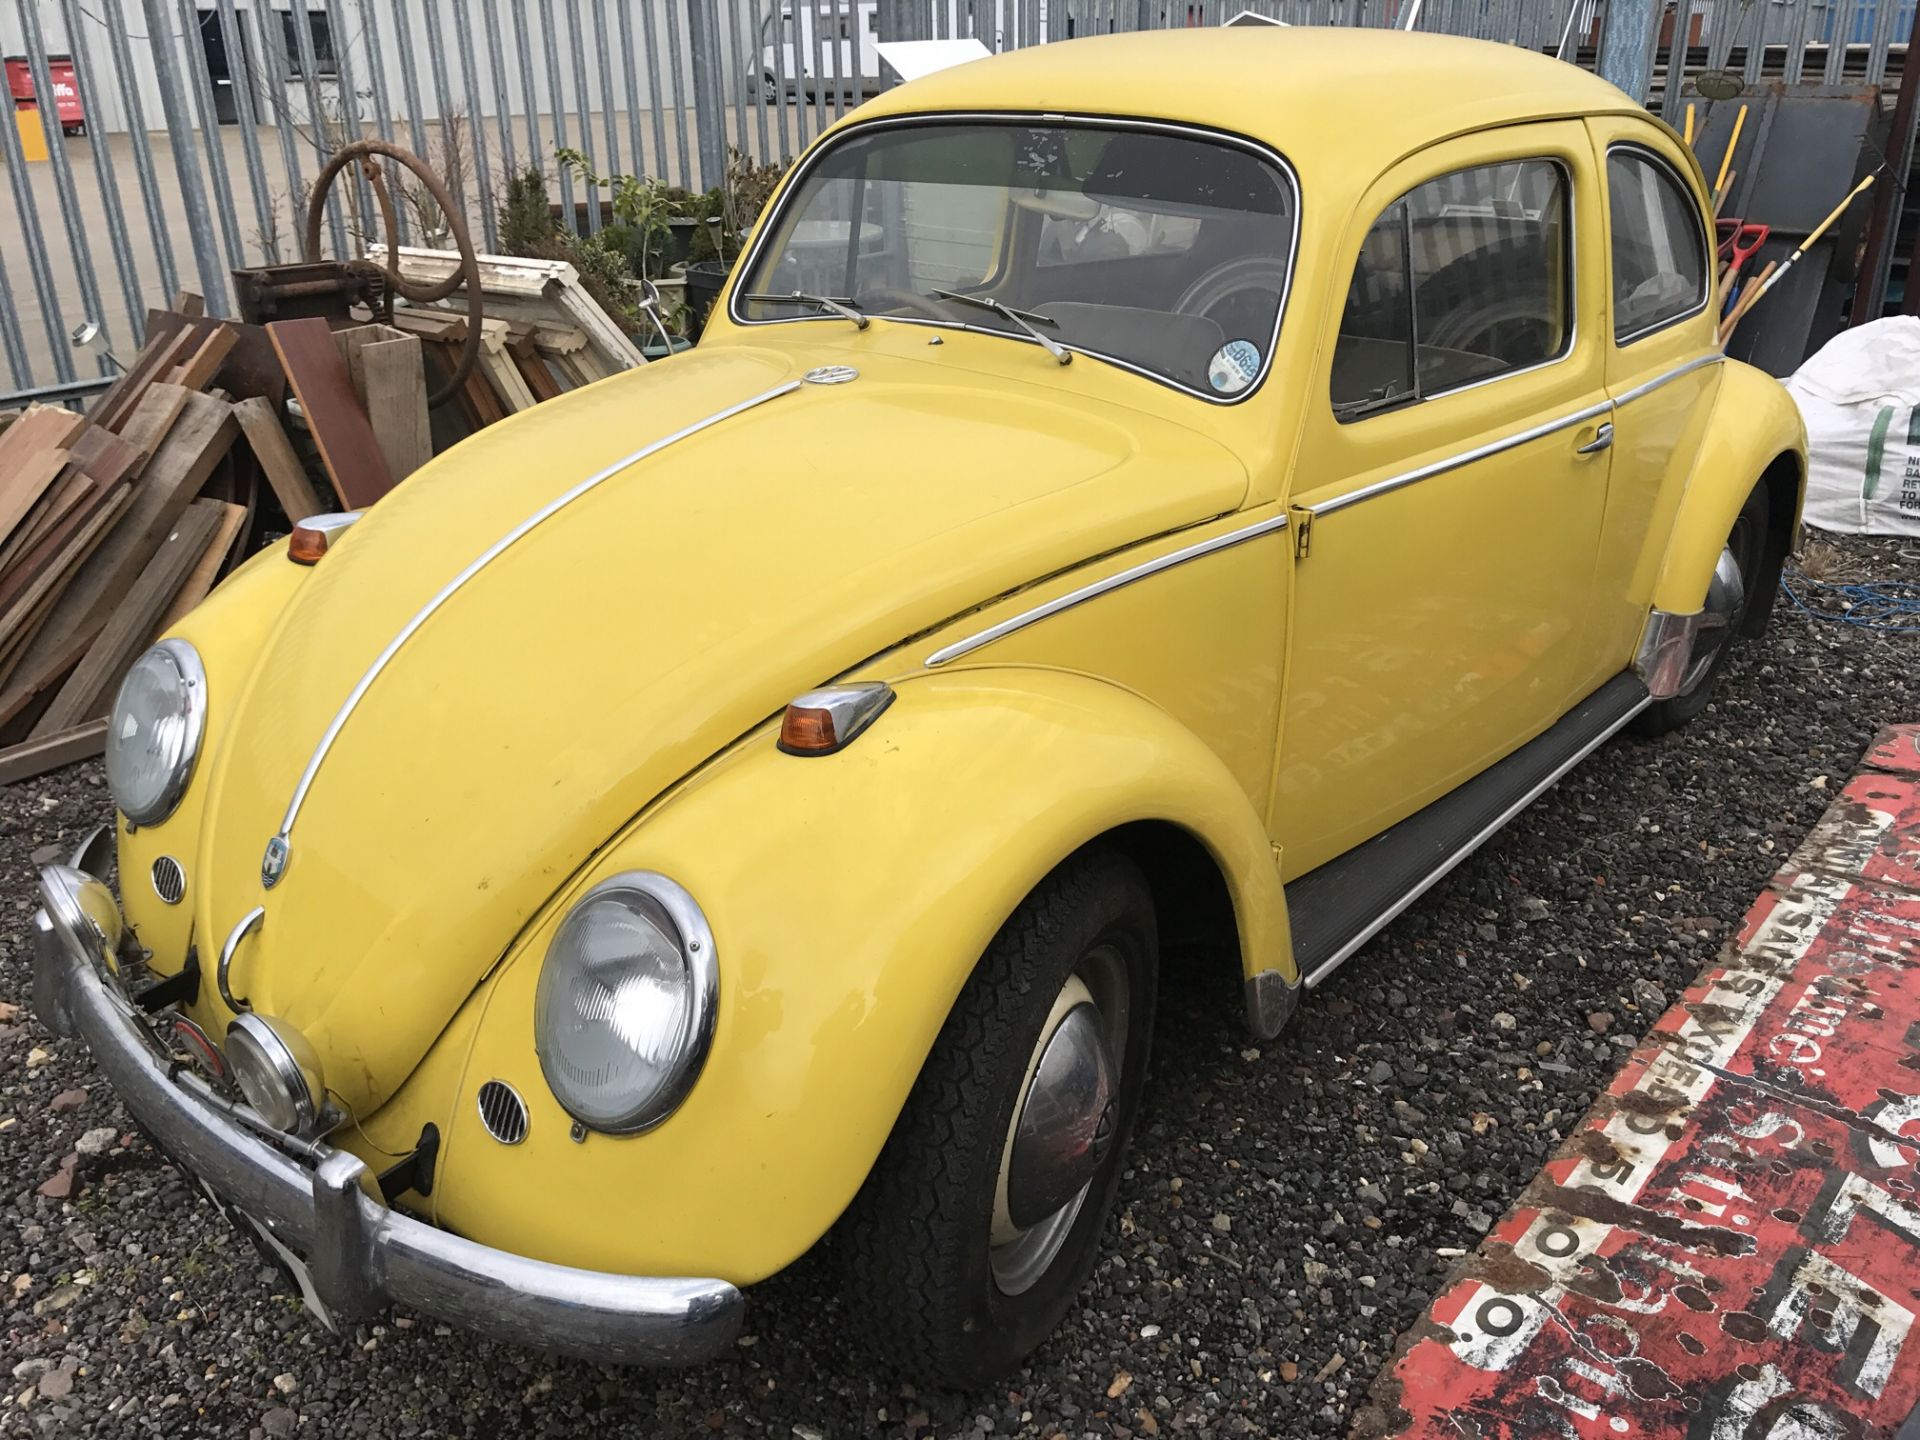 10/07/1958 VW BEETLE WITH REG: BEX 569 - V5 SHOWING 1 OWNER FROM NEW - Image 9 of 14